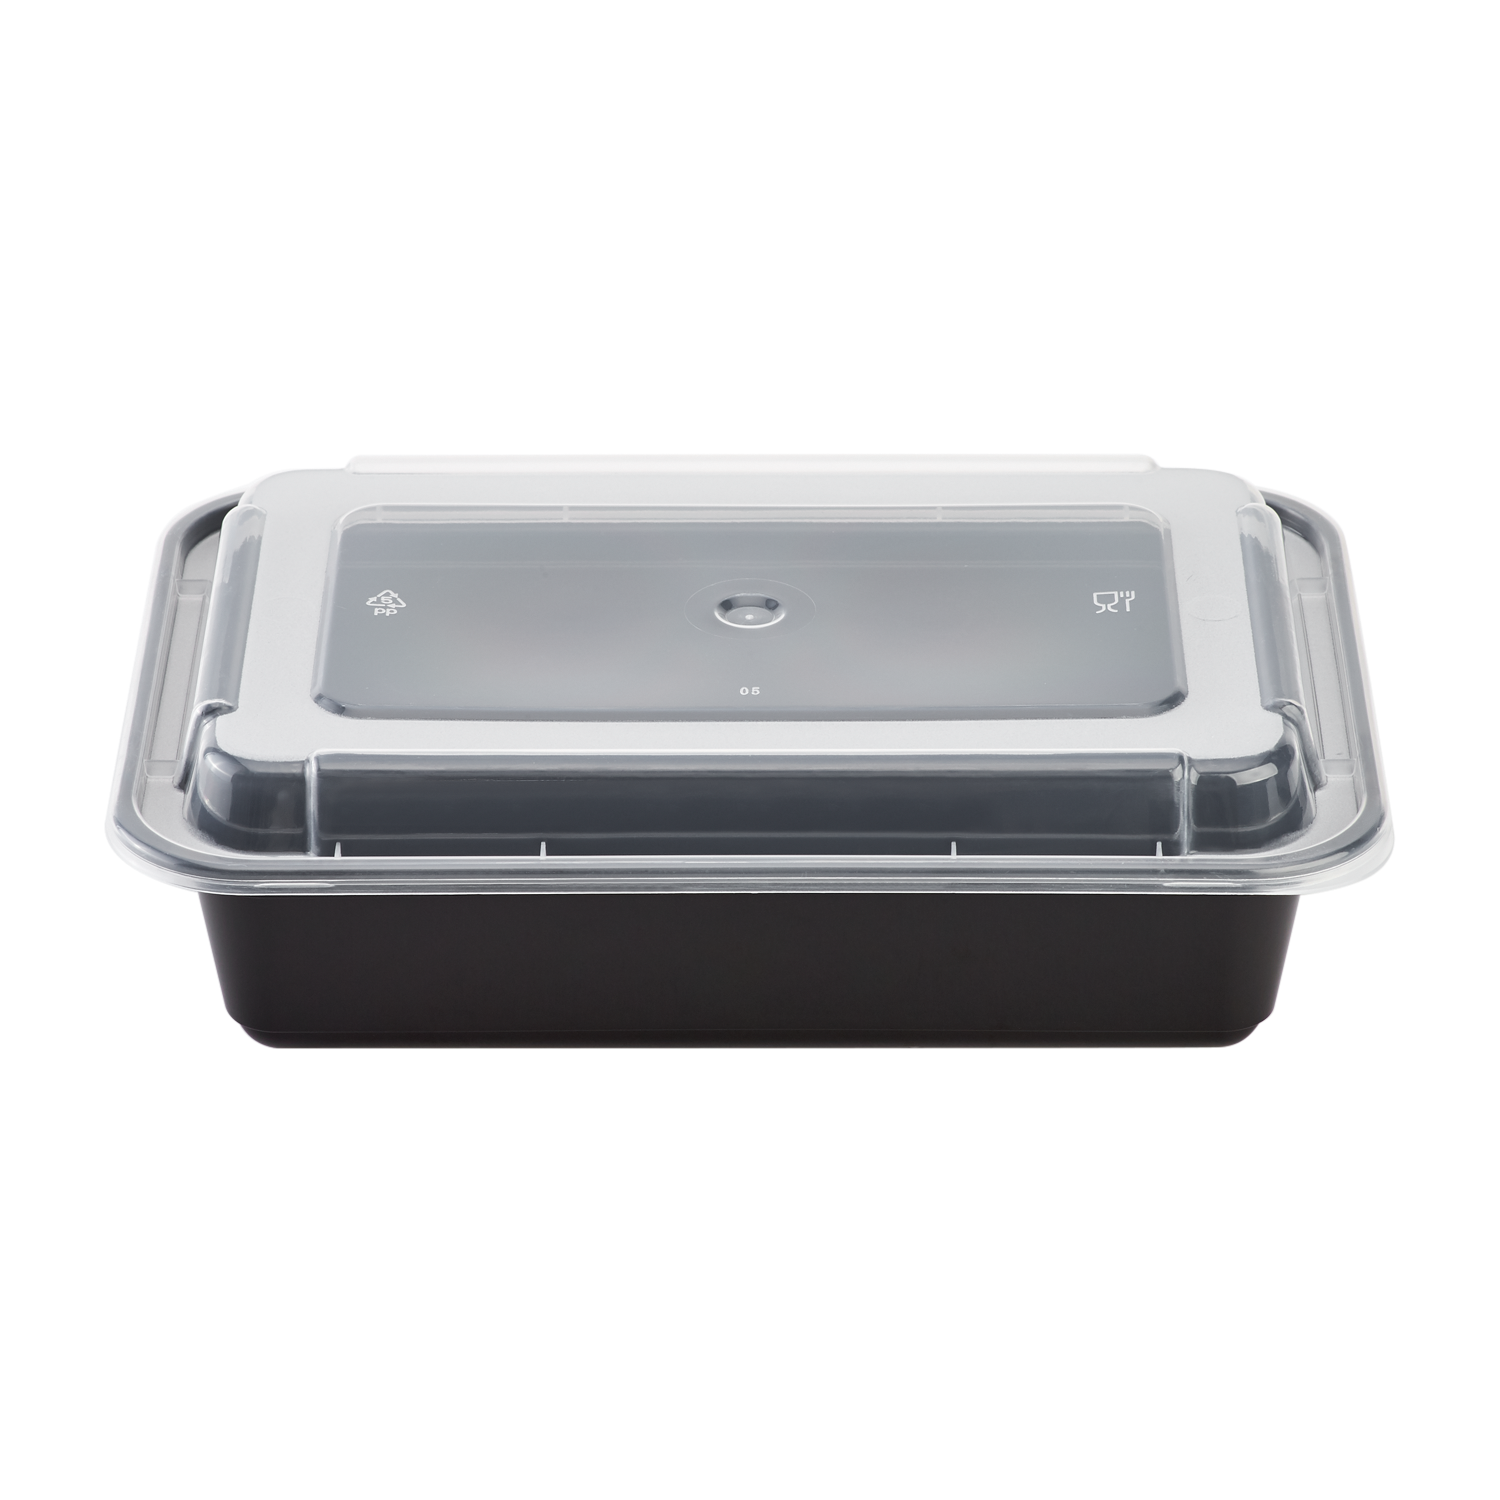 38oz Meal Prep Containers  38 oz Food Containers in Bulk